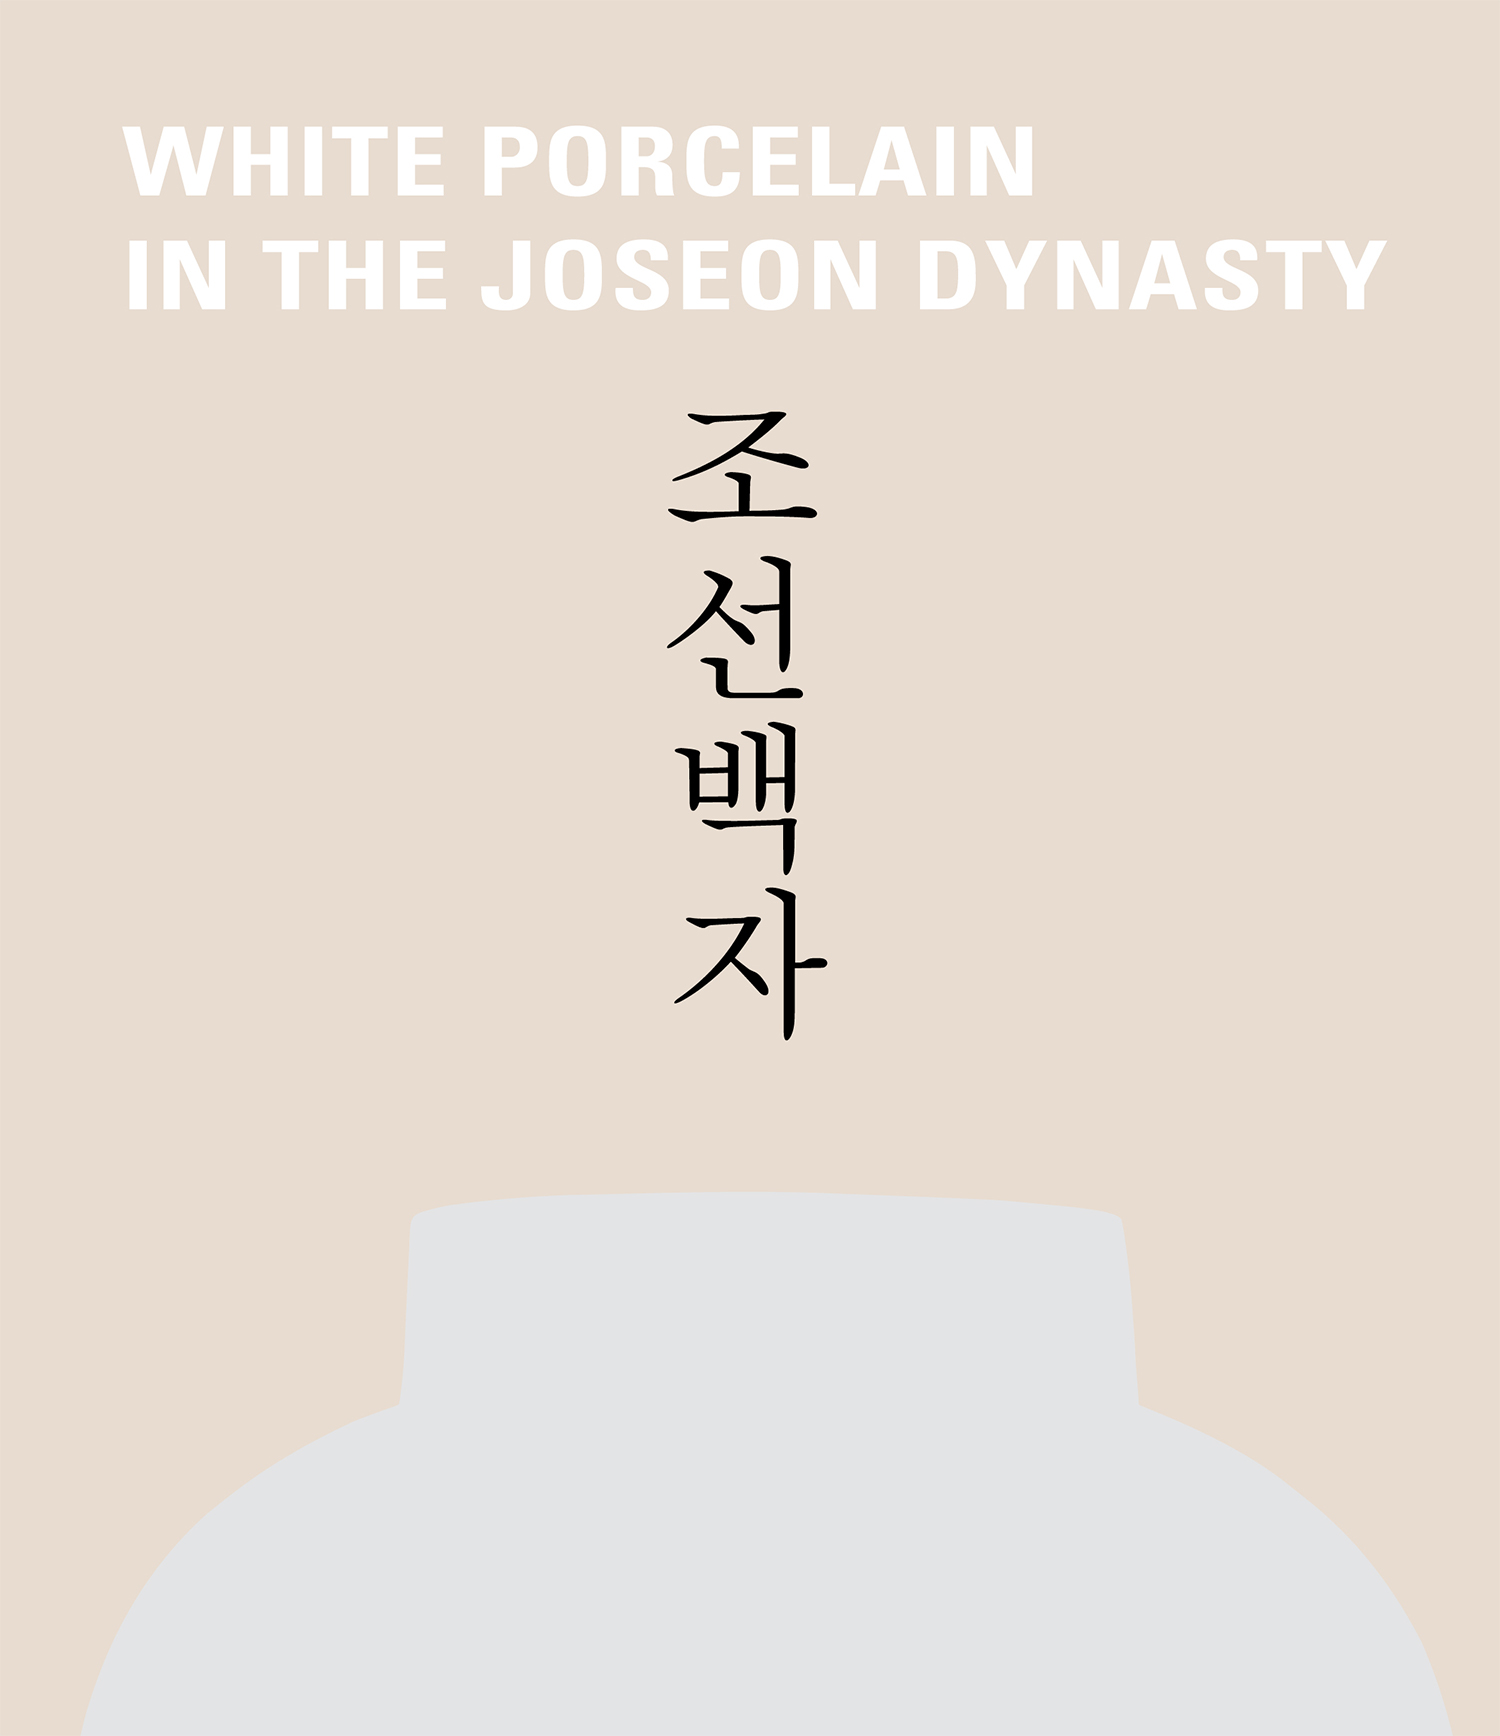 WHITE PORCELAIN IN THE JOSEON DYNASTY